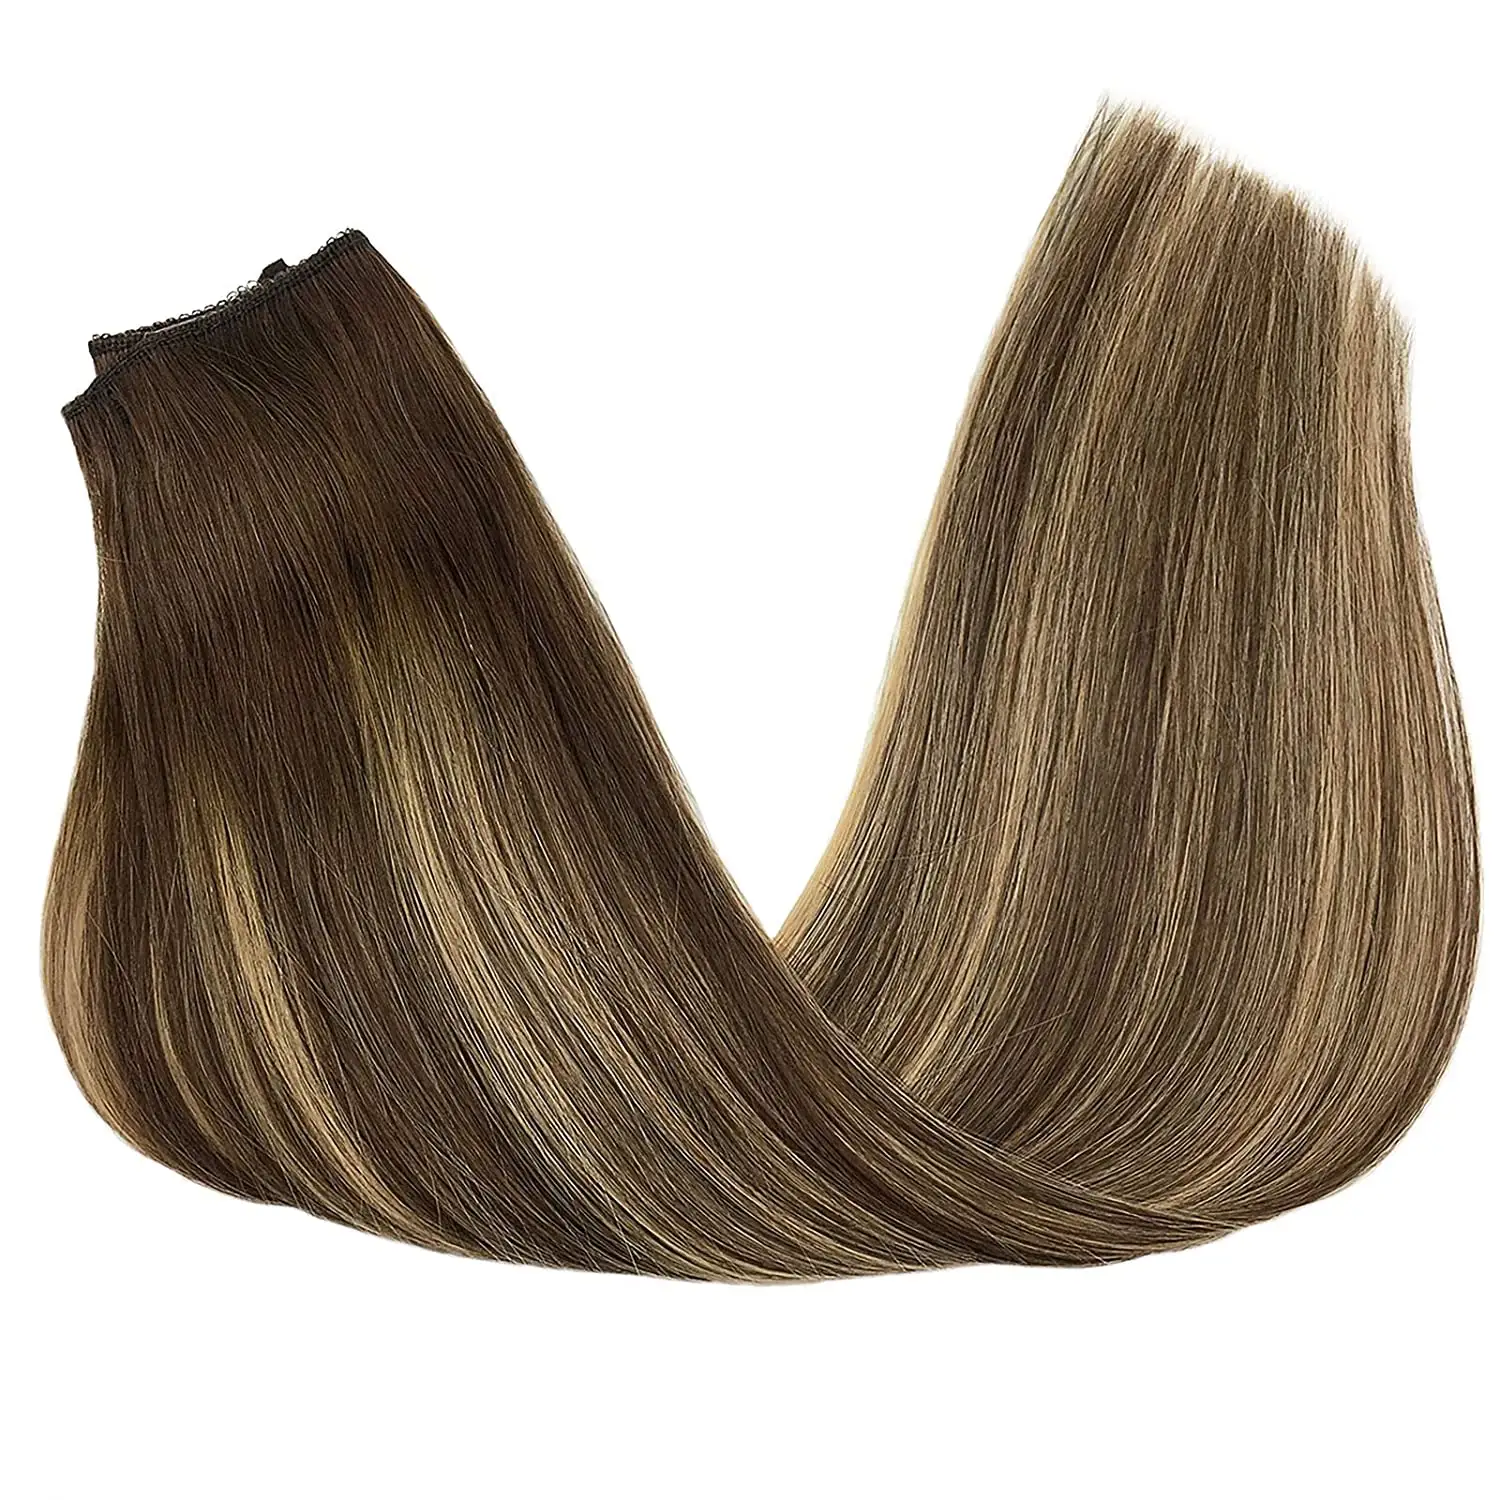 TopElles Halo Hair Extensions Human Hair Ombre Chocolate Brown to Honey Blonde for fashion women